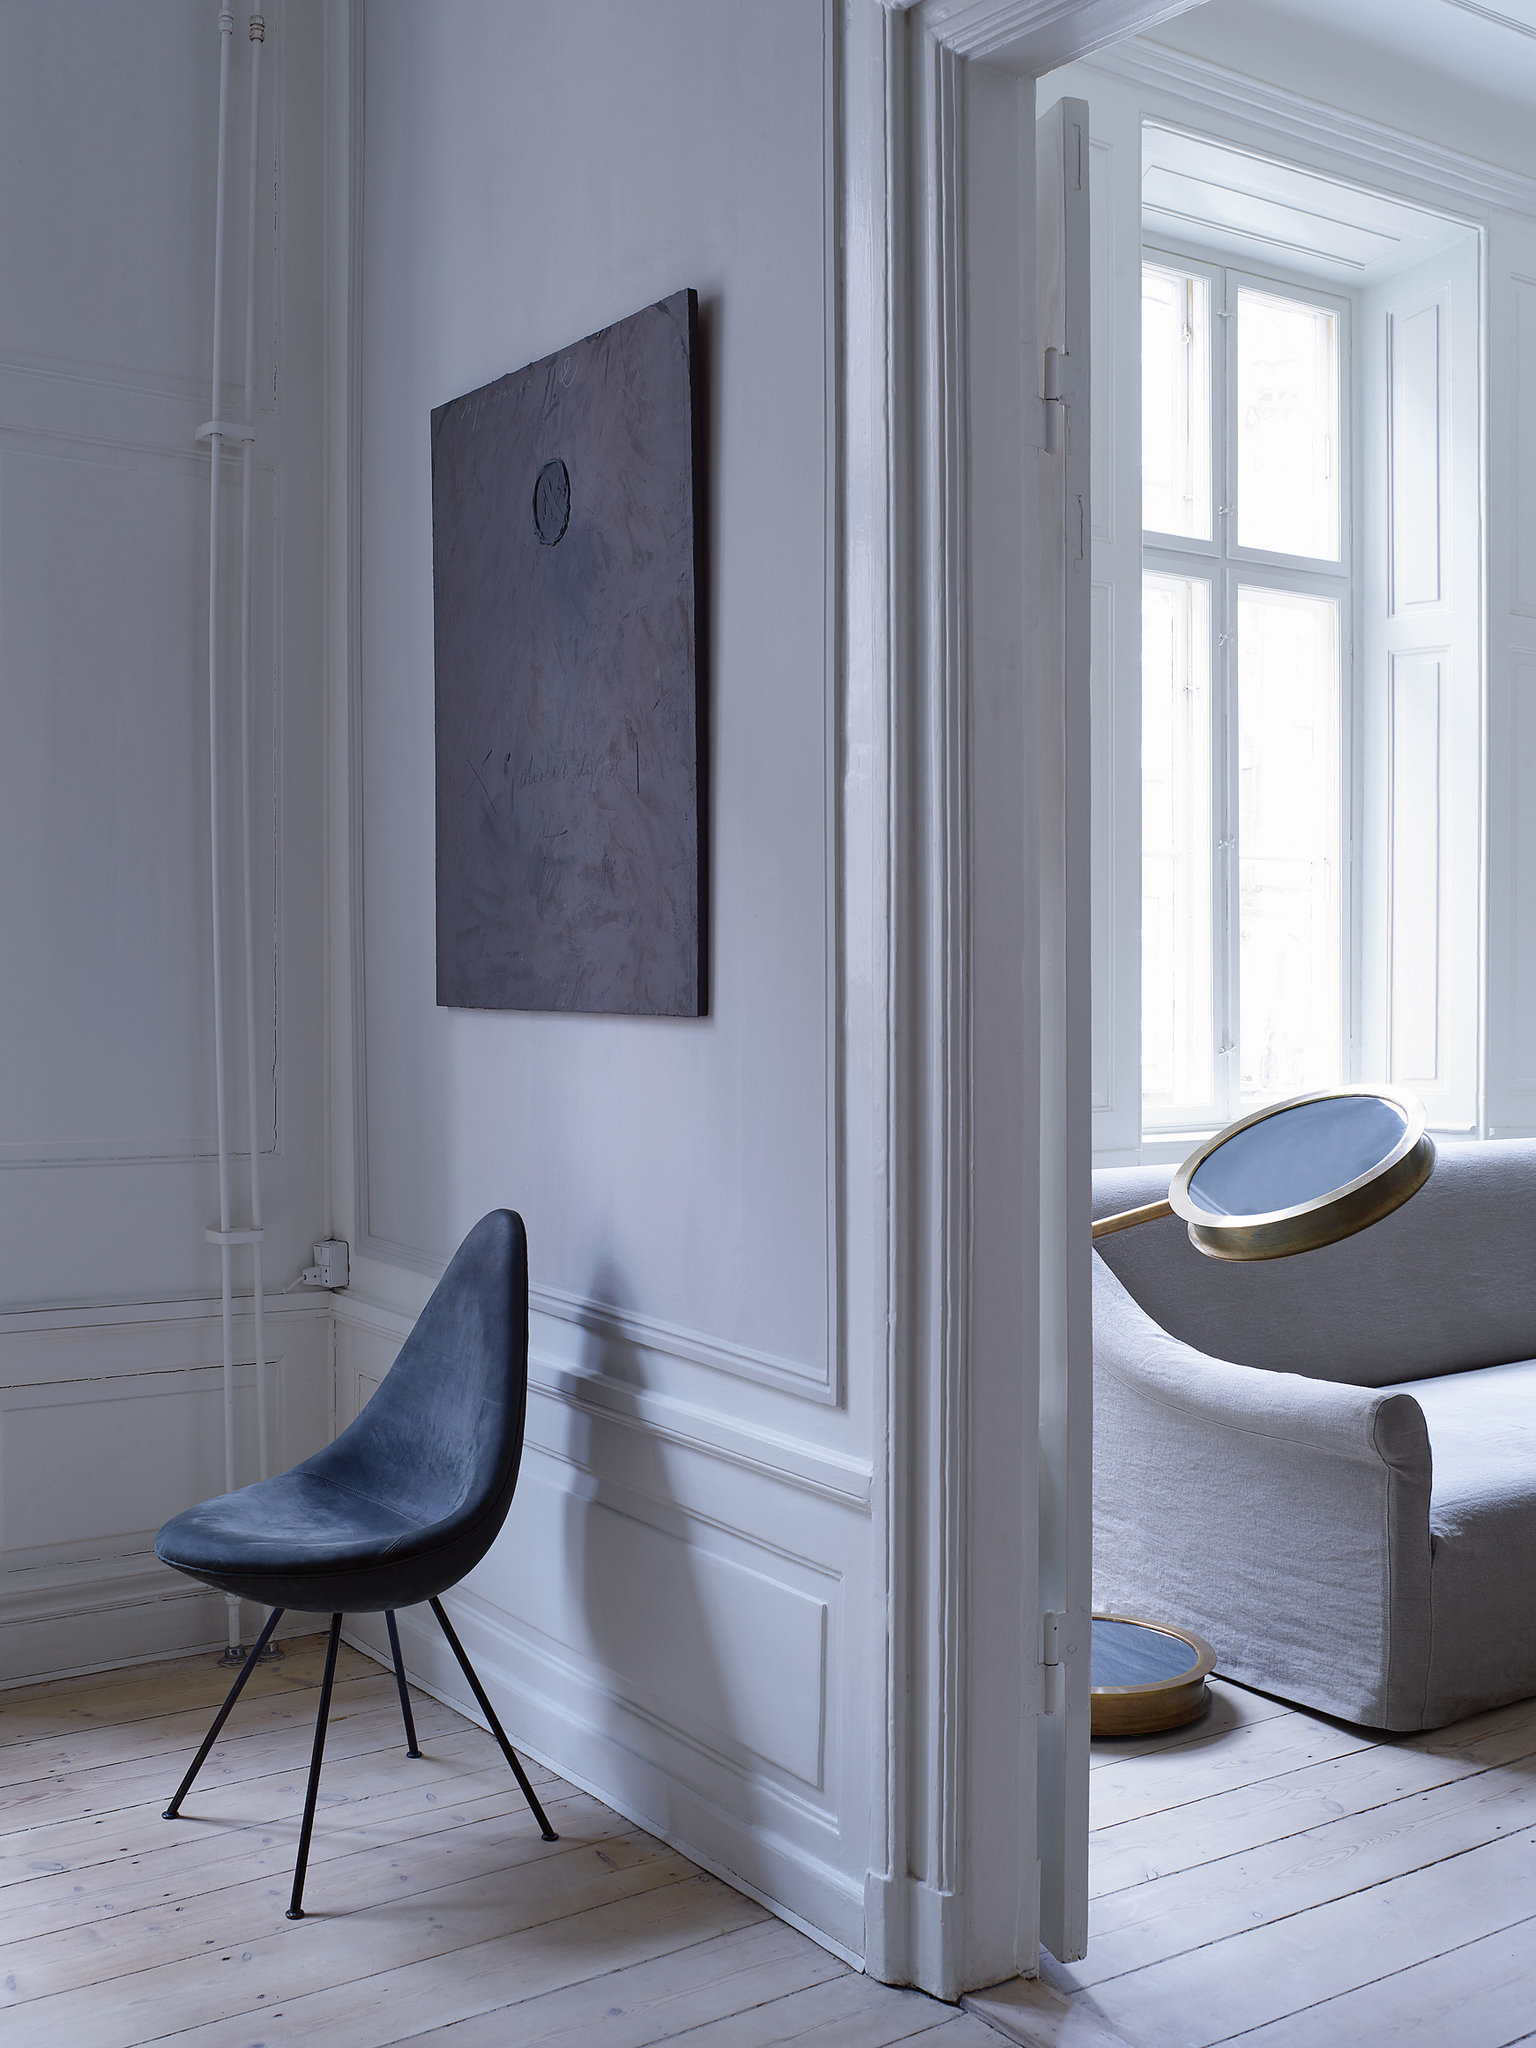 Gustav designed this special edition Arne Jacobsen drop chair in gray nubuck.